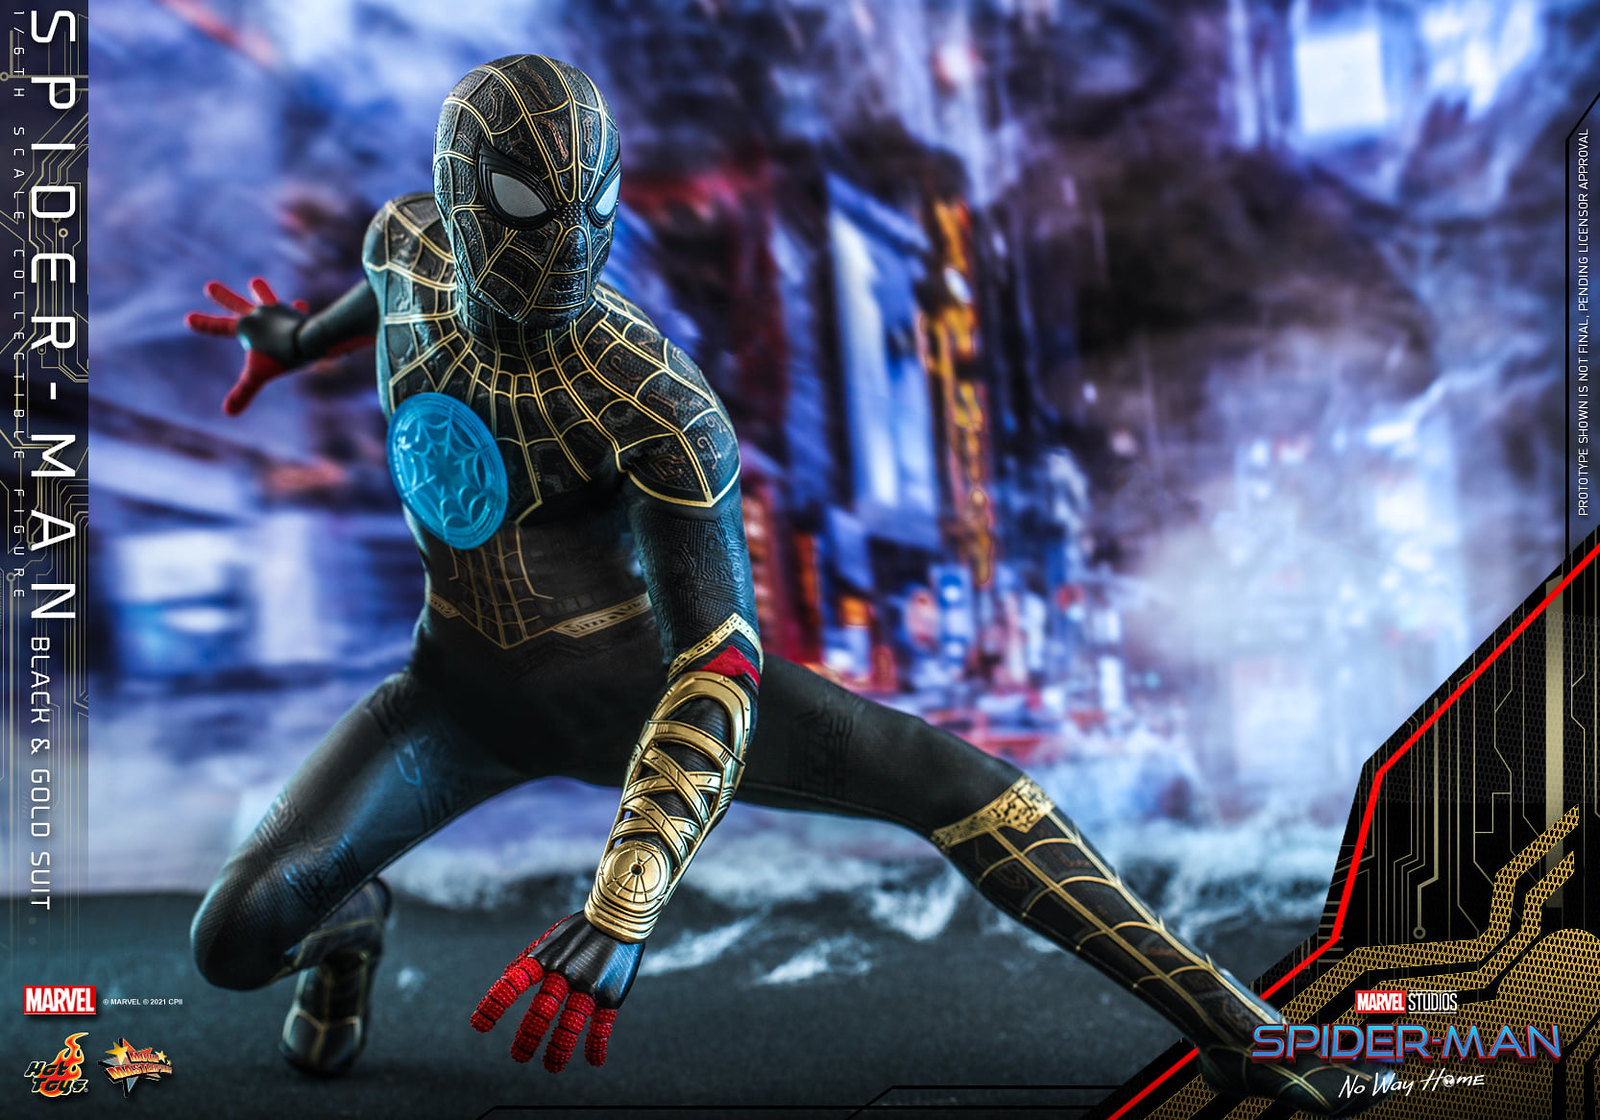 NEW PRODUCT: Hot Toys 【Spider-Man: No Way Home - 1/6th scale Spider-Man (Black & Gold Suit) Collectible Figure】 51311991564_04e022751f_h